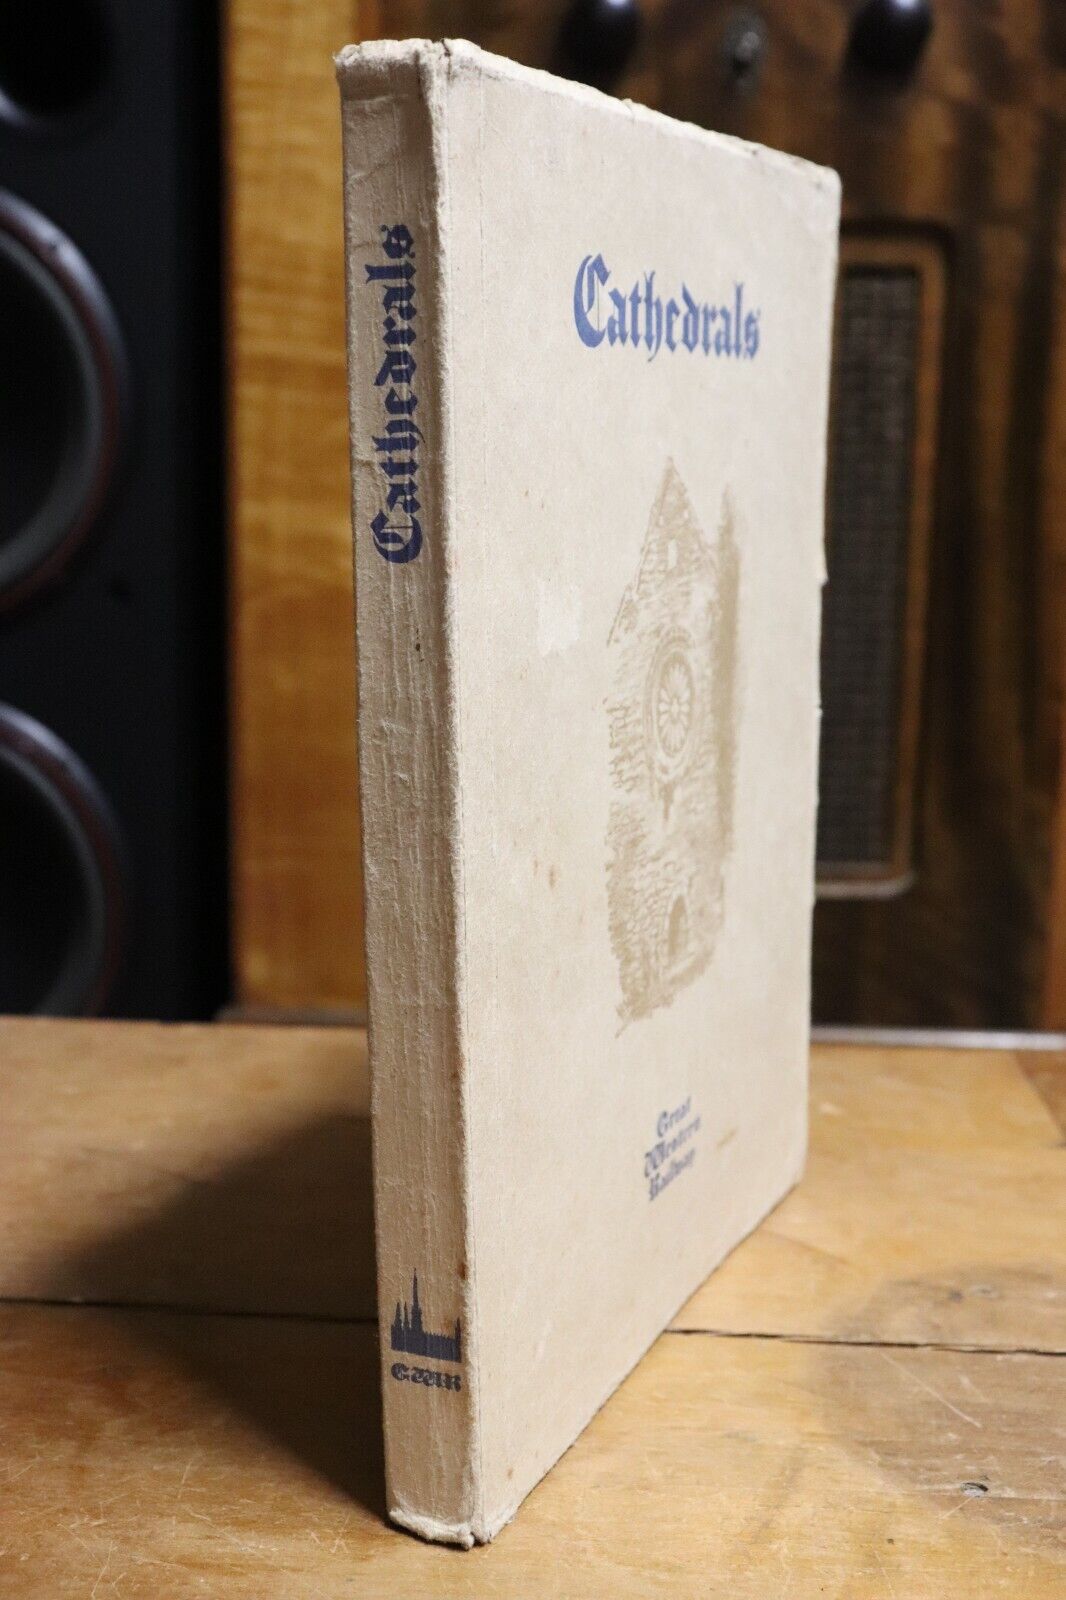 Cathedrals by The Great Western Railway - 1924 - Antique Architecture Book